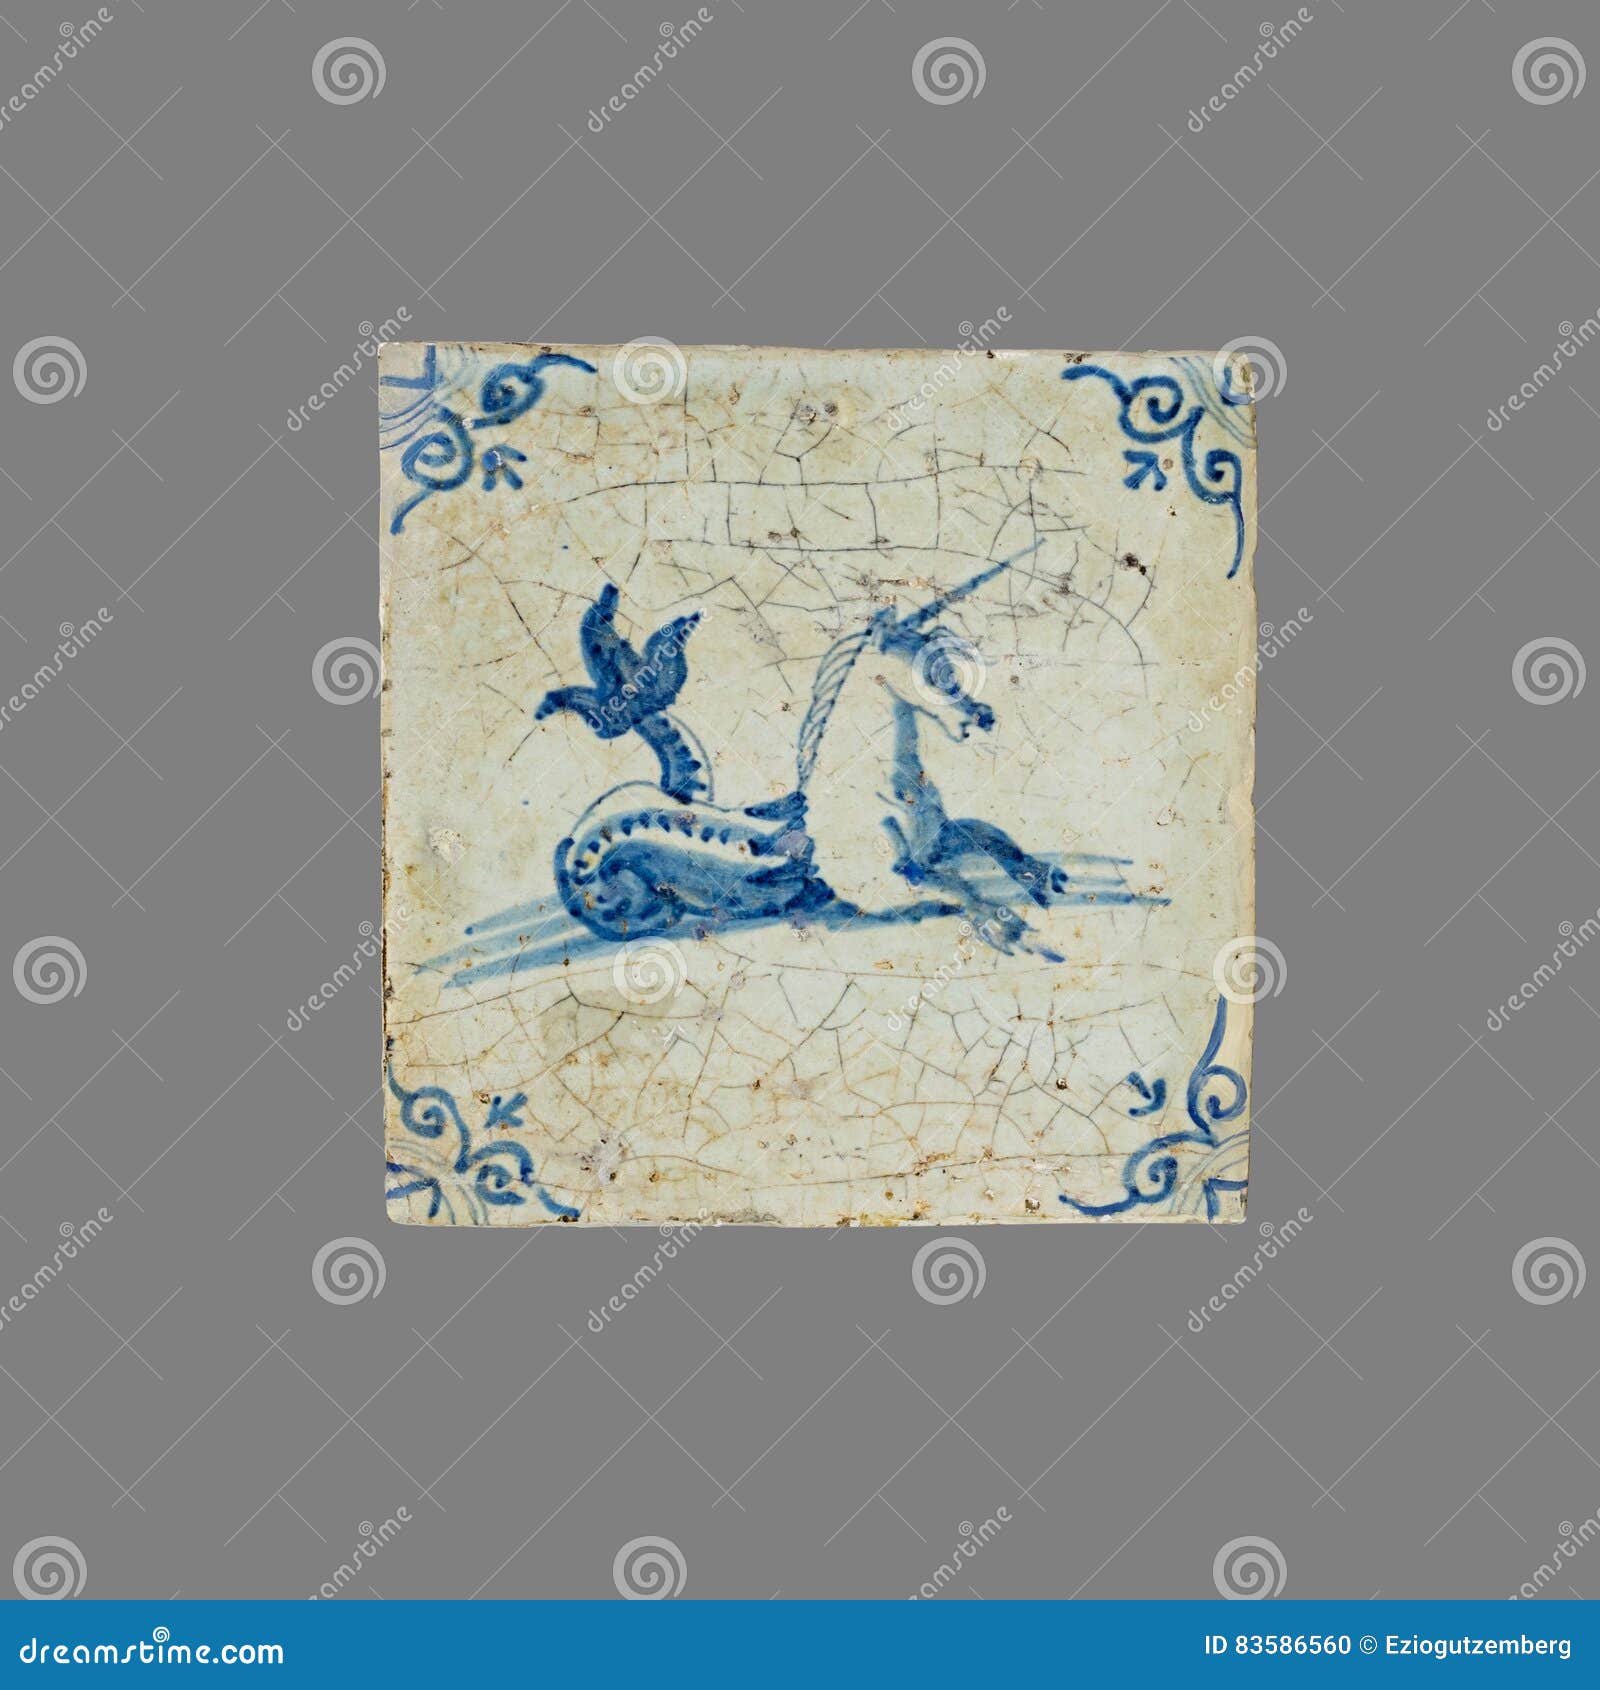 dutch tile from the 16th to the 18th century